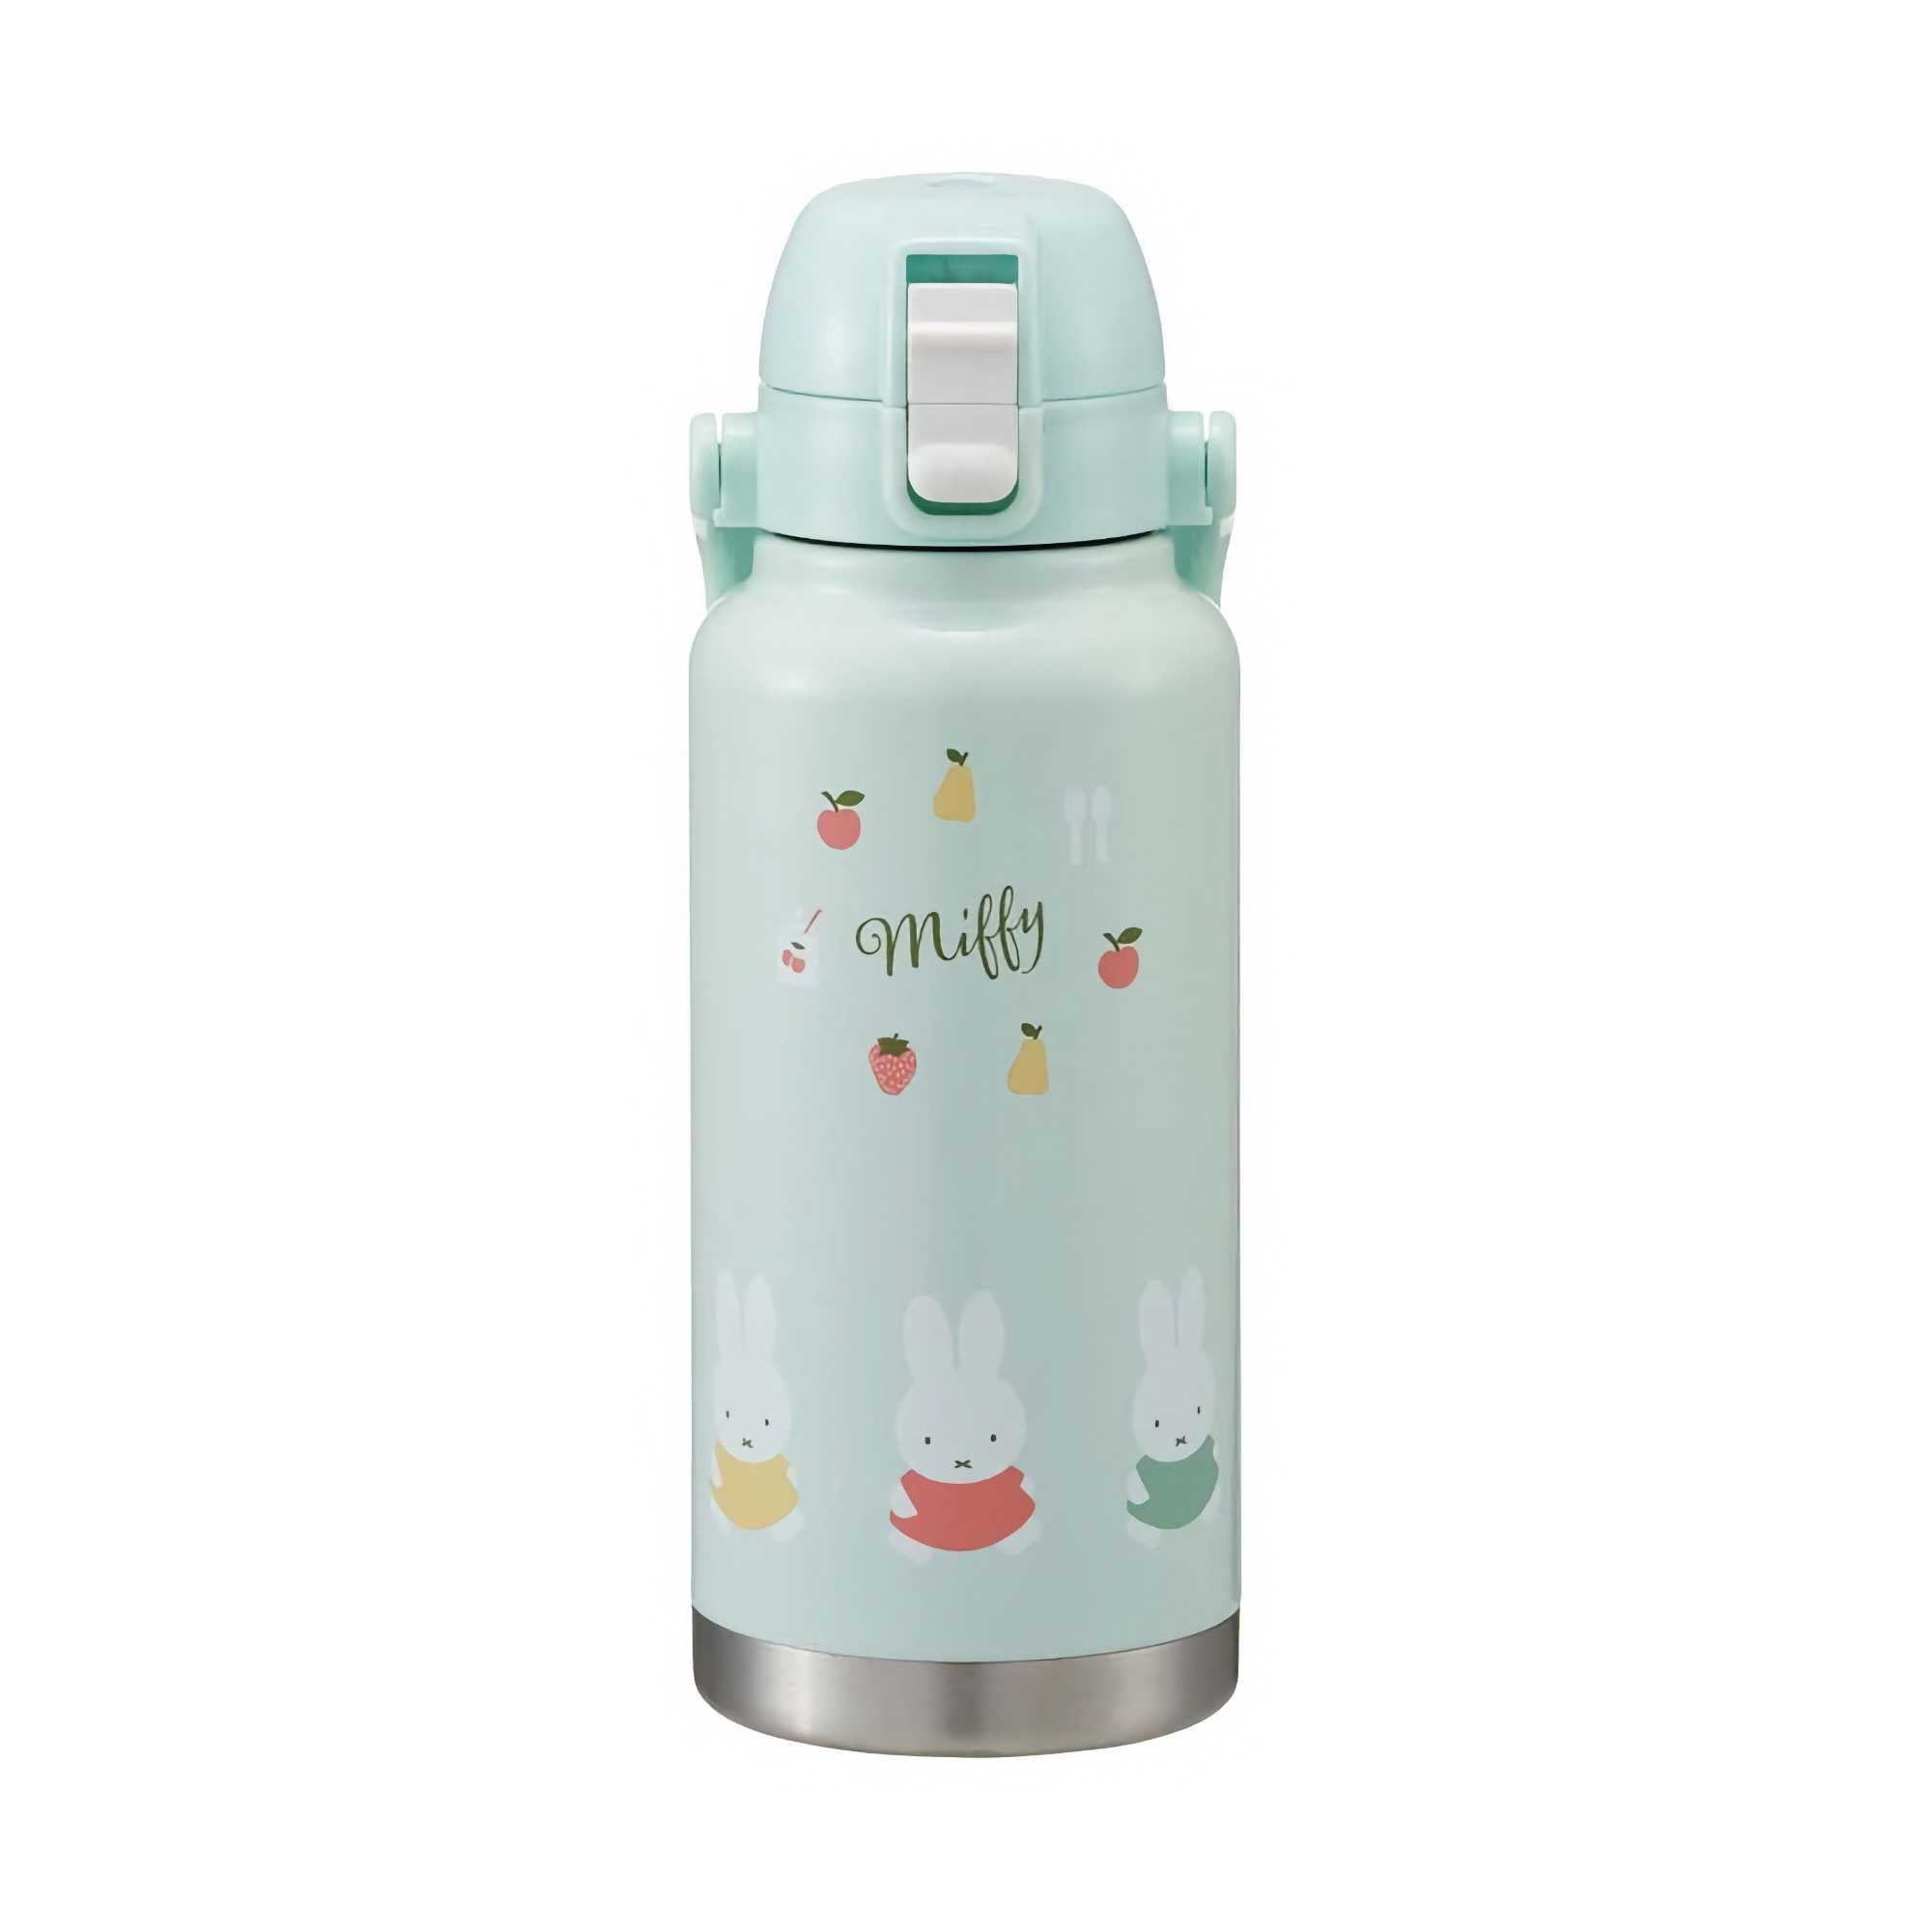 Miffy stainless steel water bottle 1000ml